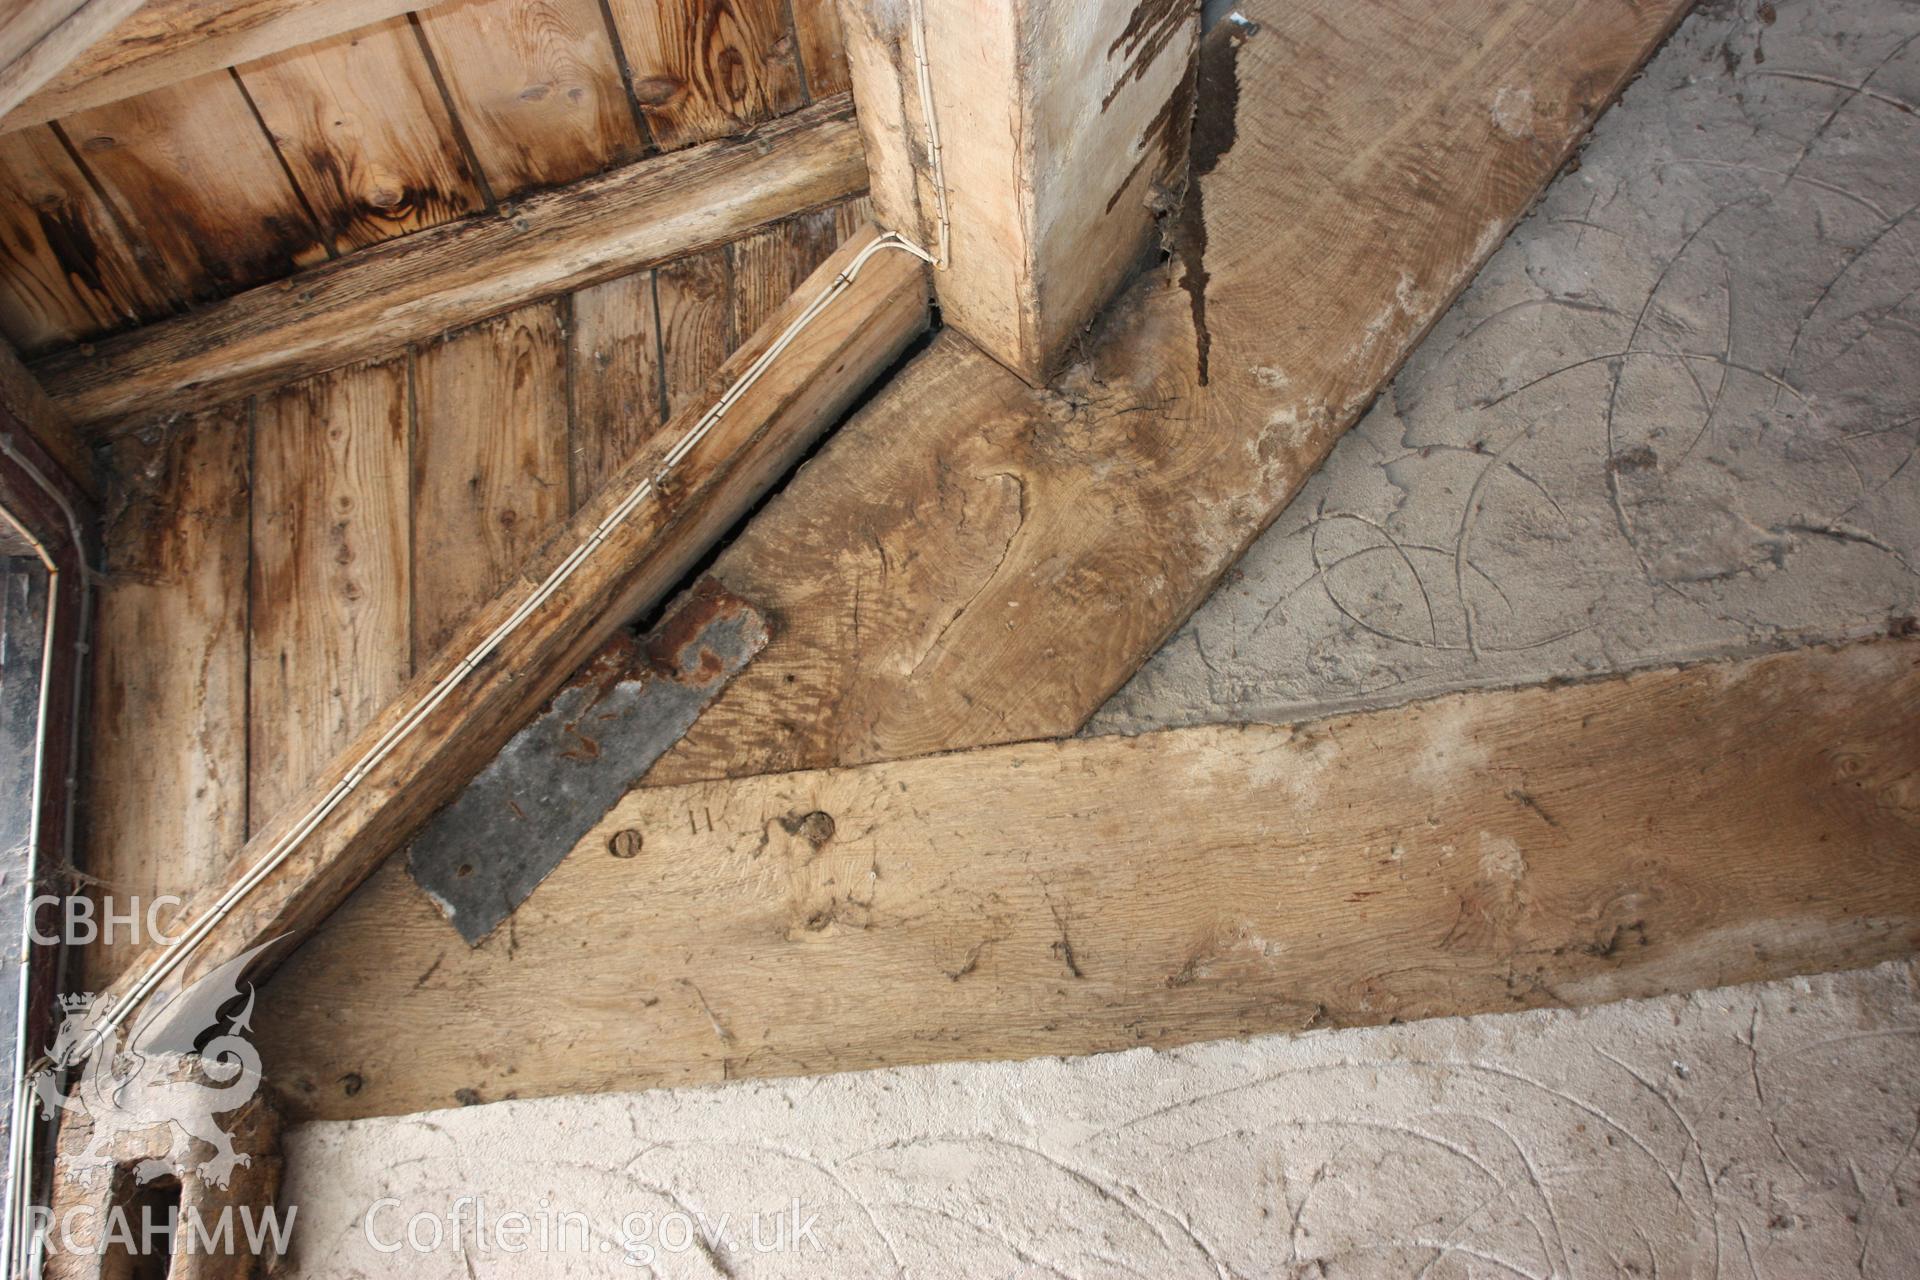 Interior wooden detail at Maes Mawr. Photographic survey of Marian Mawr in Cwm, Denbighshire by Geoff Ward on 20th August 2010.